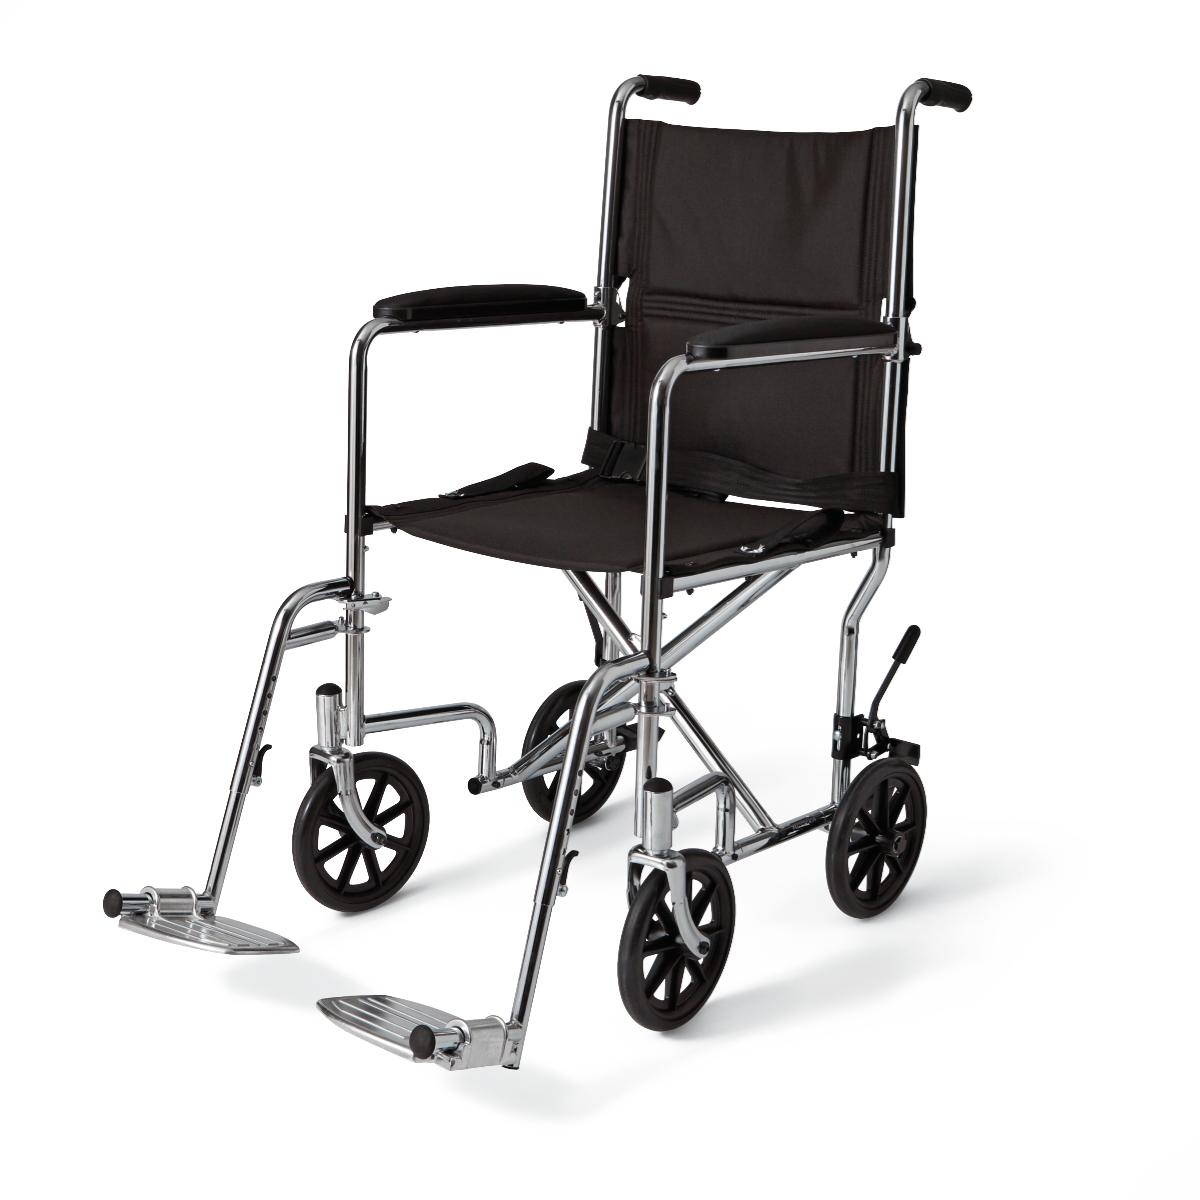 They are much lighter and more compact than traditional wheelchair and that is a game changer because you can take them just about anywhere.